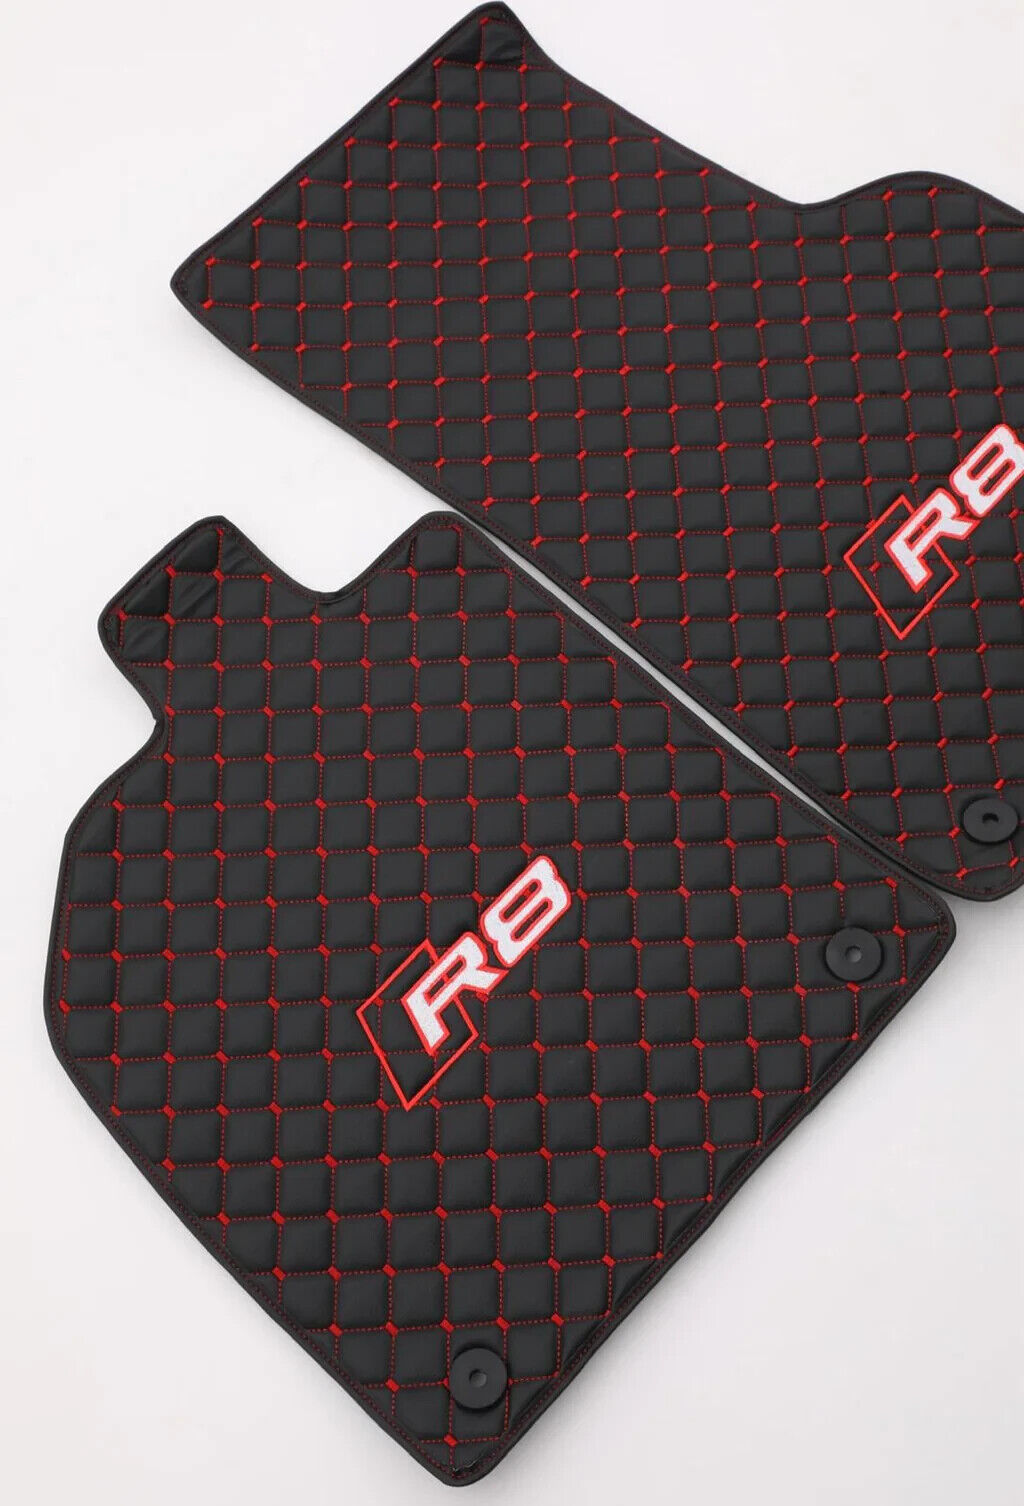 AUDi R8 CAR Floor Mat, Tailor Made for Your Vehicle, AUDi R8 CAR COVER ,A++